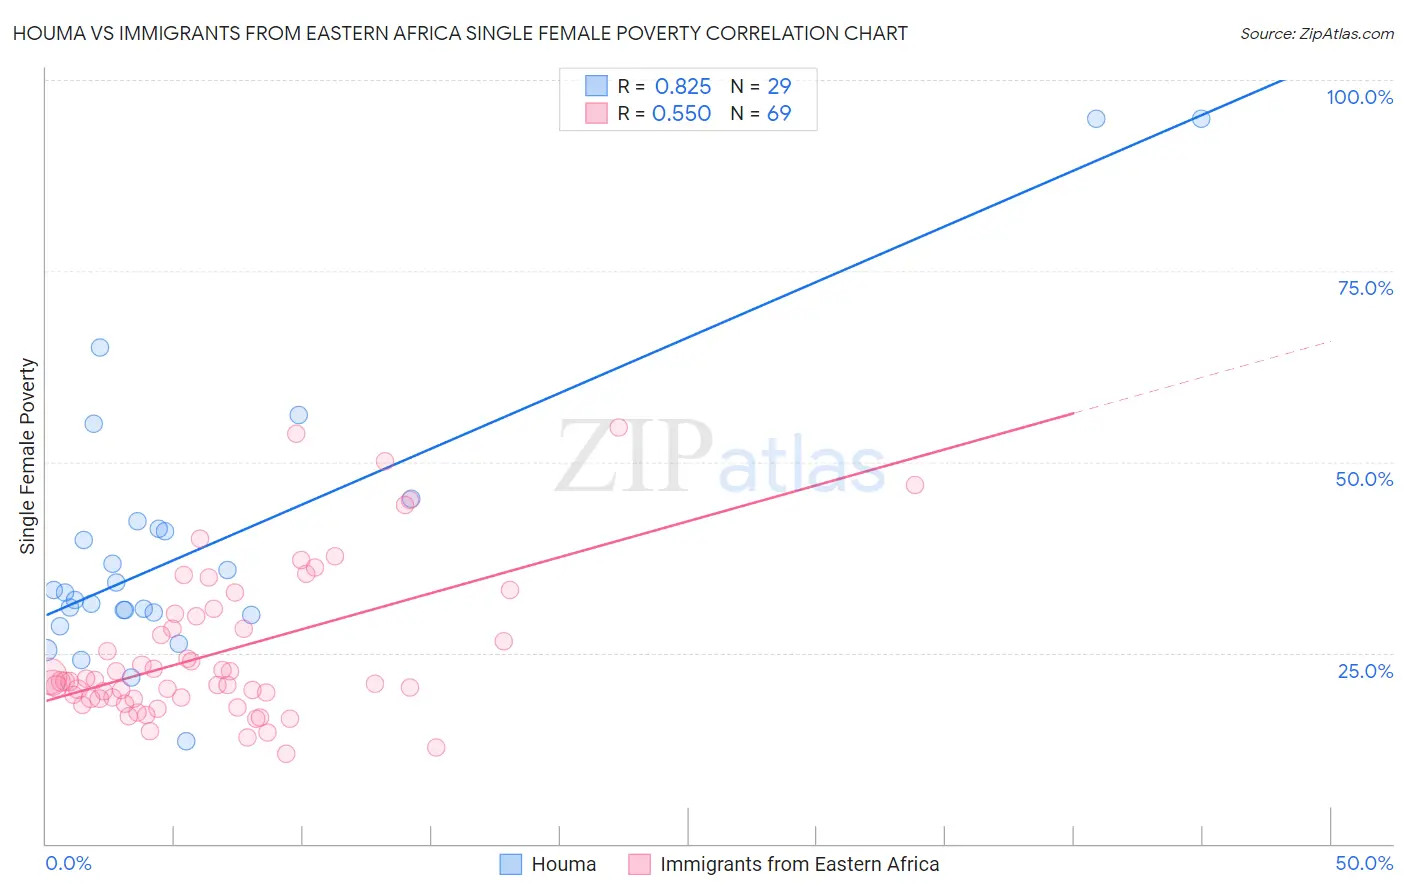 Houma vs Immigrants from Eastern Africa Single Female Poverty